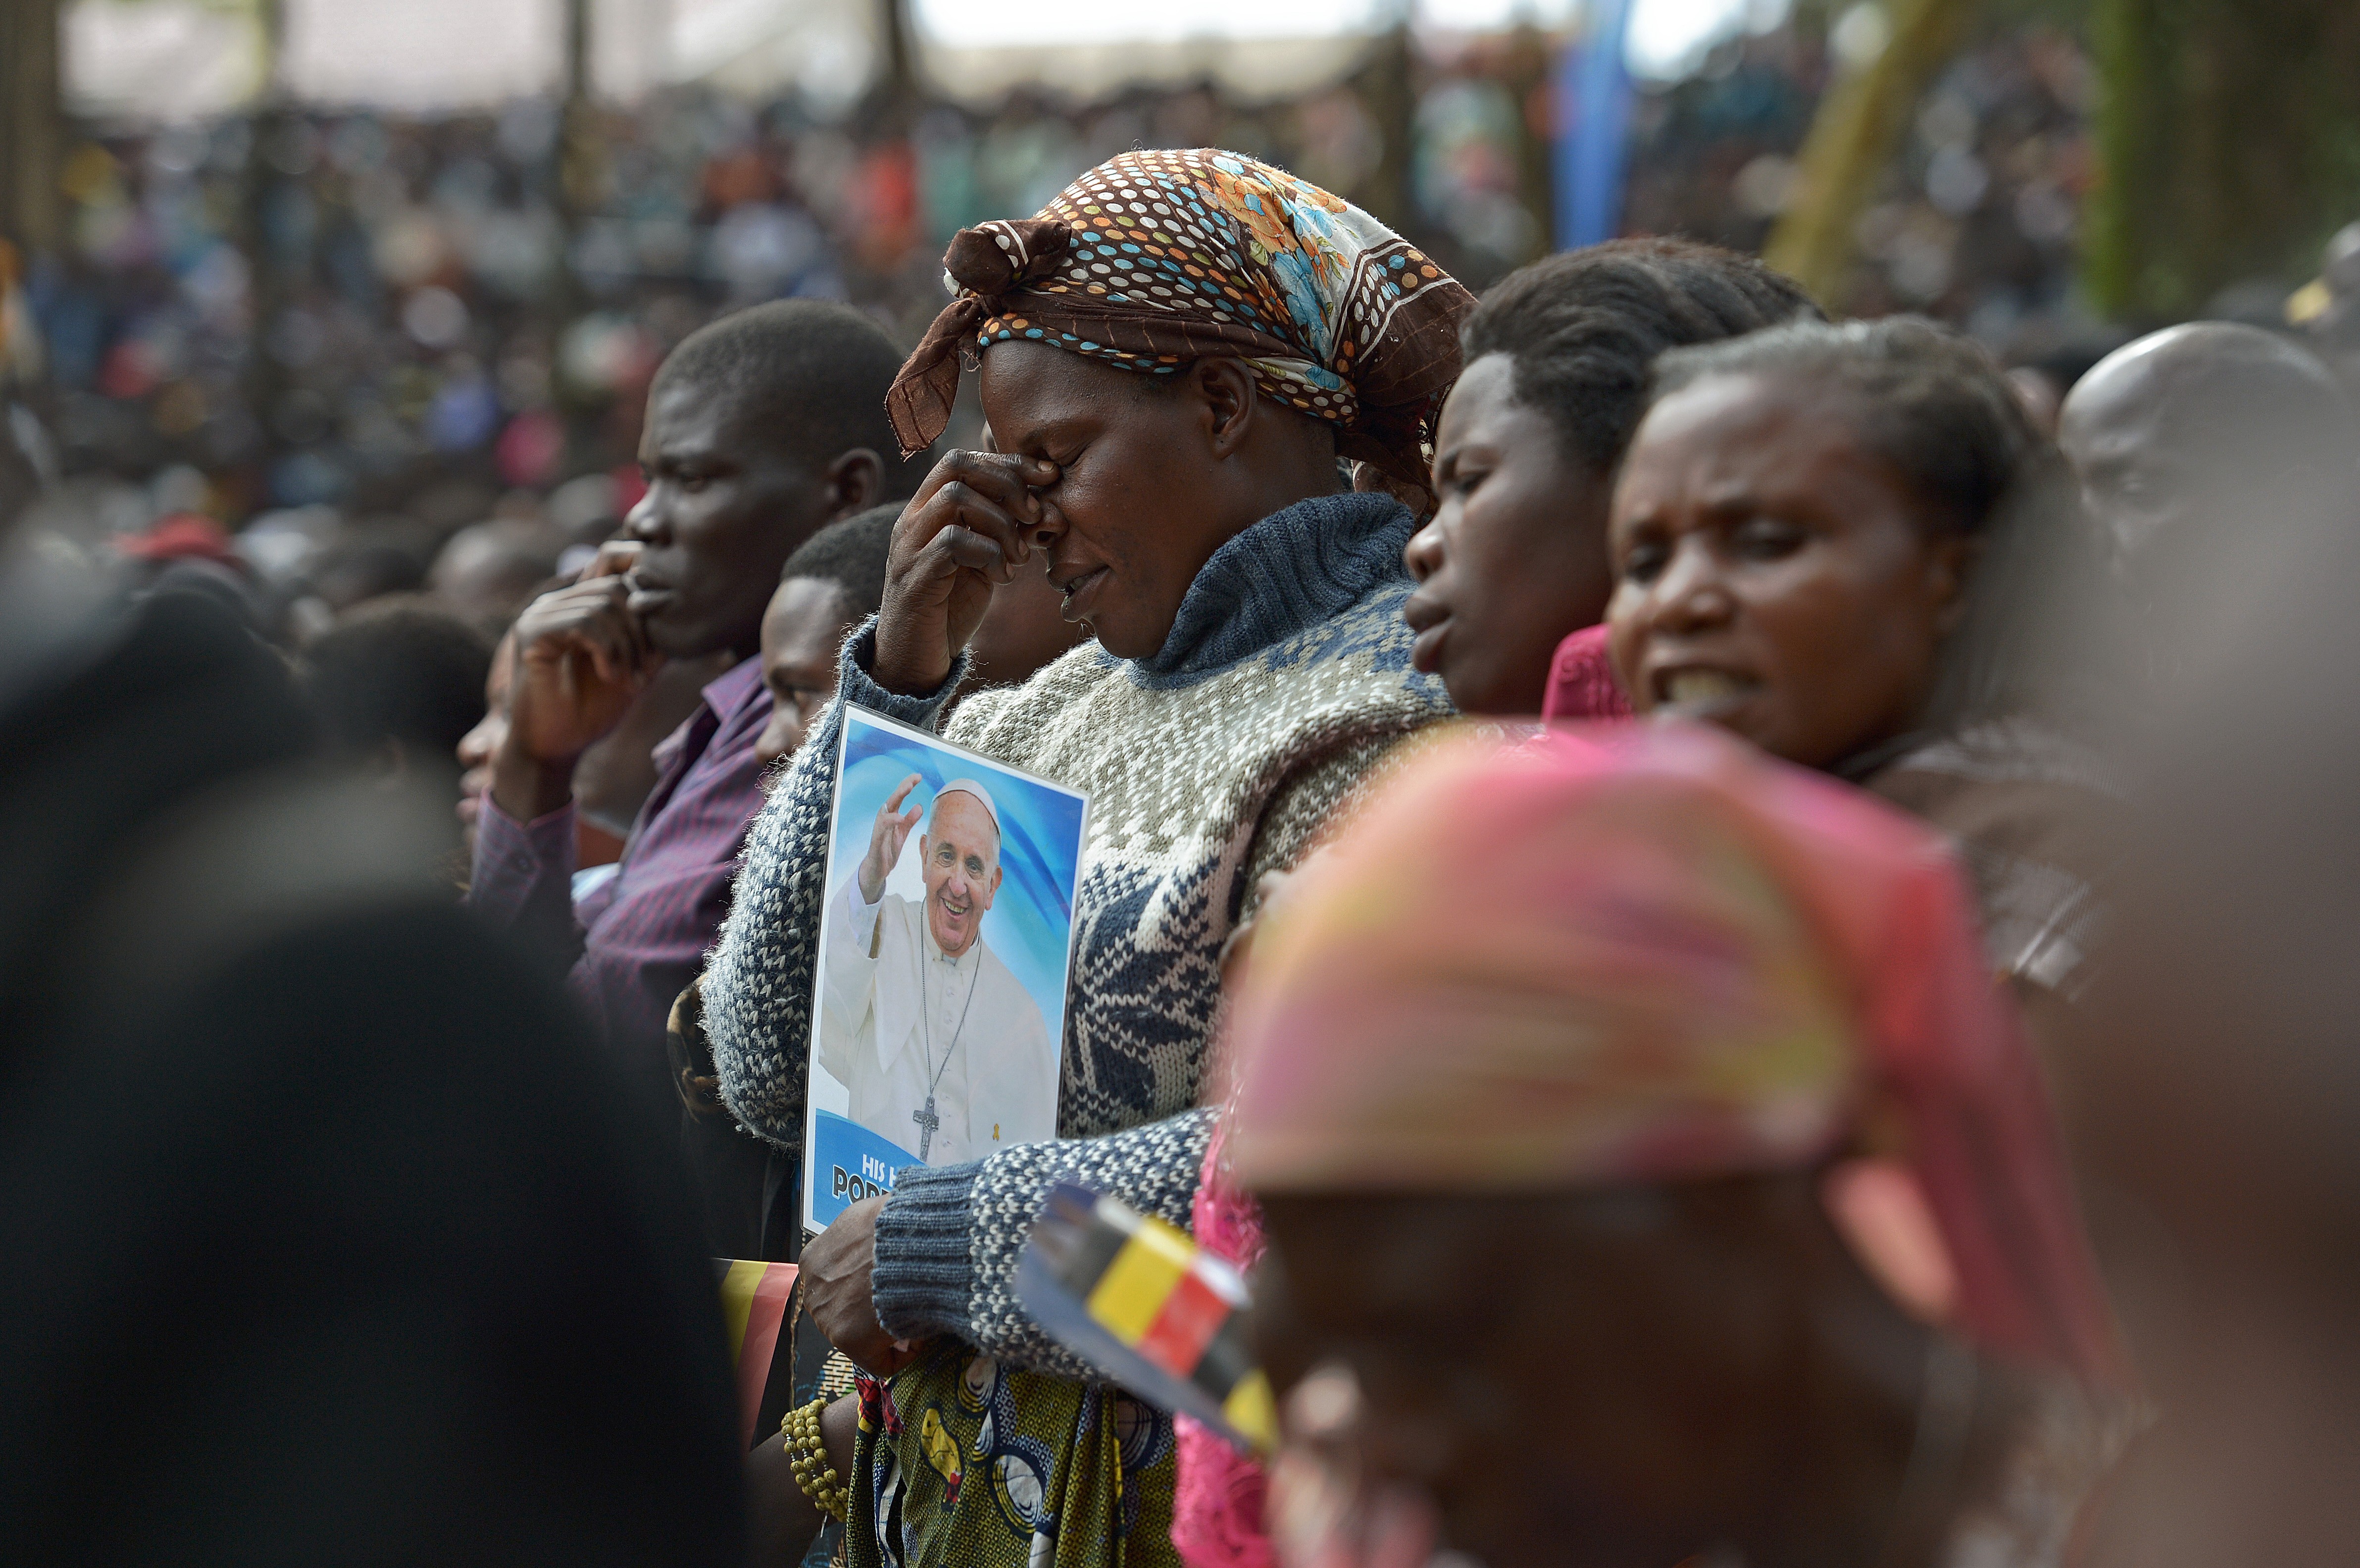 A believer reacts at Namugongo Martyrs' Shrine during an open air mass held by Pope Francis in Uganda on Nov. 28, 2015.